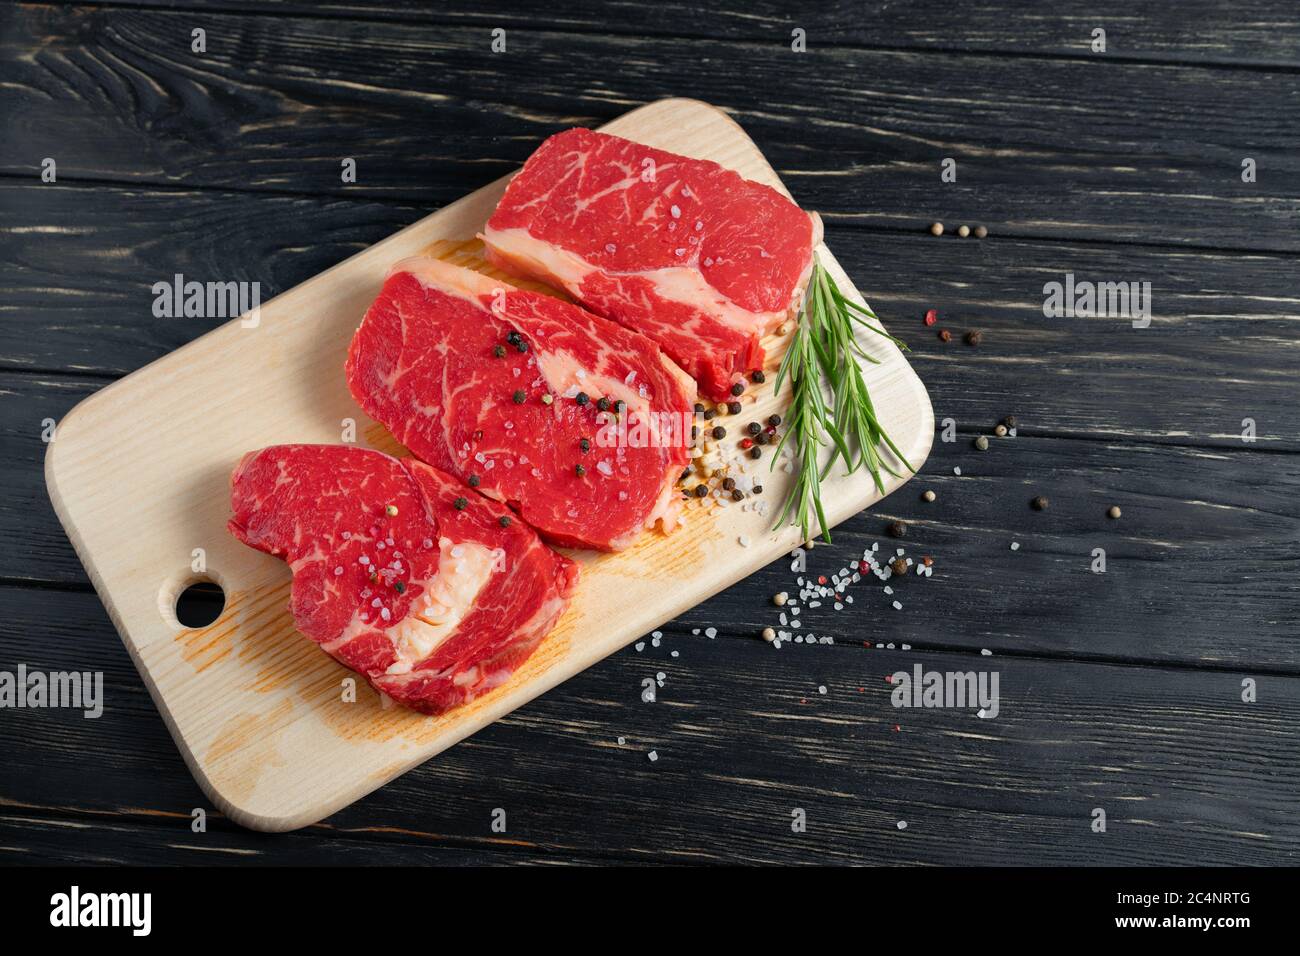 Three pieces of juicy raw beef with rosemary on a cutting board on a black wooden table background. Meat for barbecue or grill sprinkled with pepper and salt seasoning Stock Photo